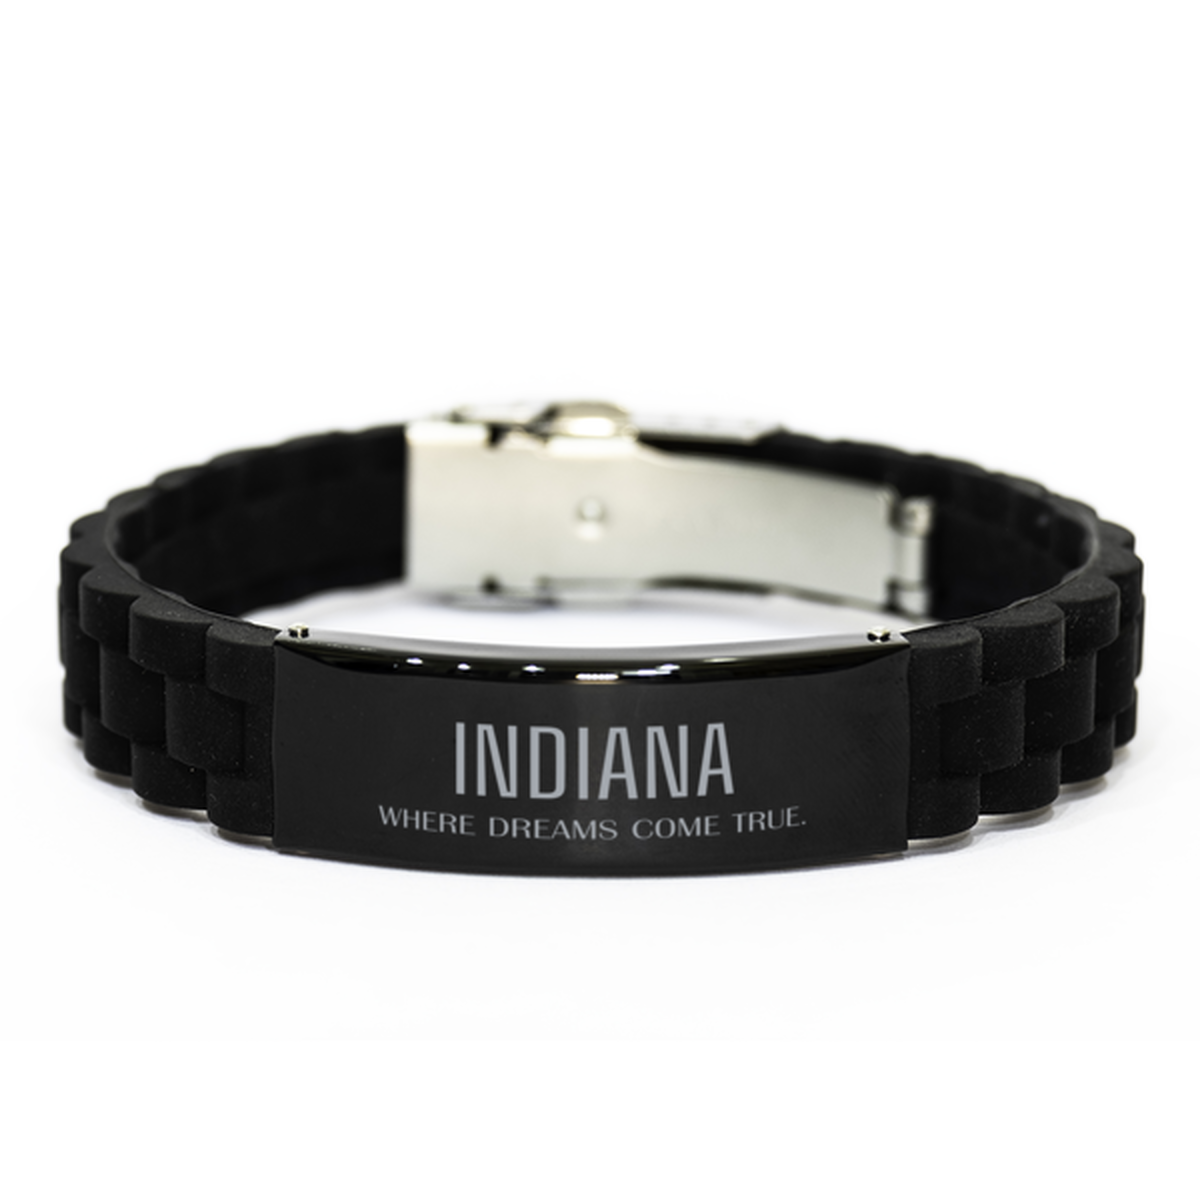 Love Indiana State Black Glidelock Clasp Bracelet, Indiana Where dreams come true, Birthday Inspirational Gifts For Indiana Men, Women, Friends